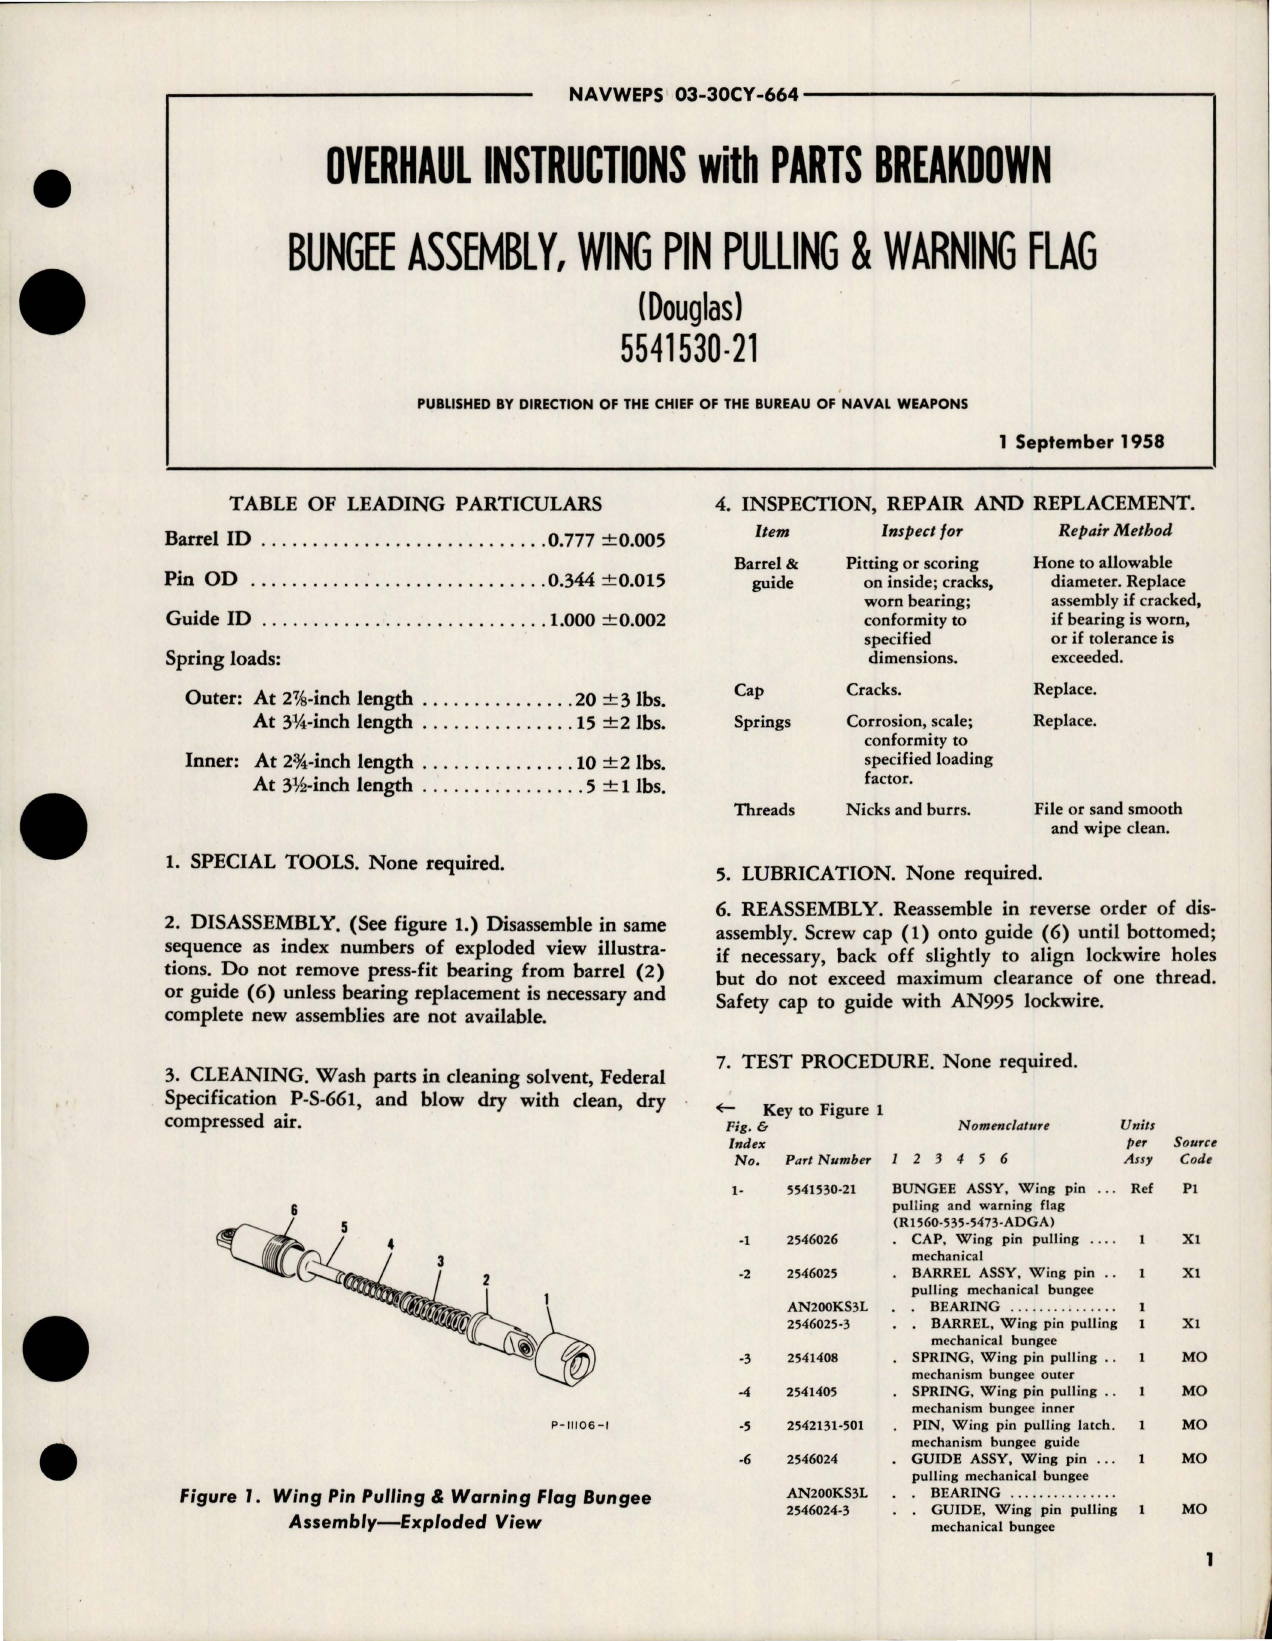 Sample page 1 from AirCorps Library document: Overhaul Instructions with Parts for Wing Pin Pulling and Warning Flag Bungee Assembly - 5541530-21